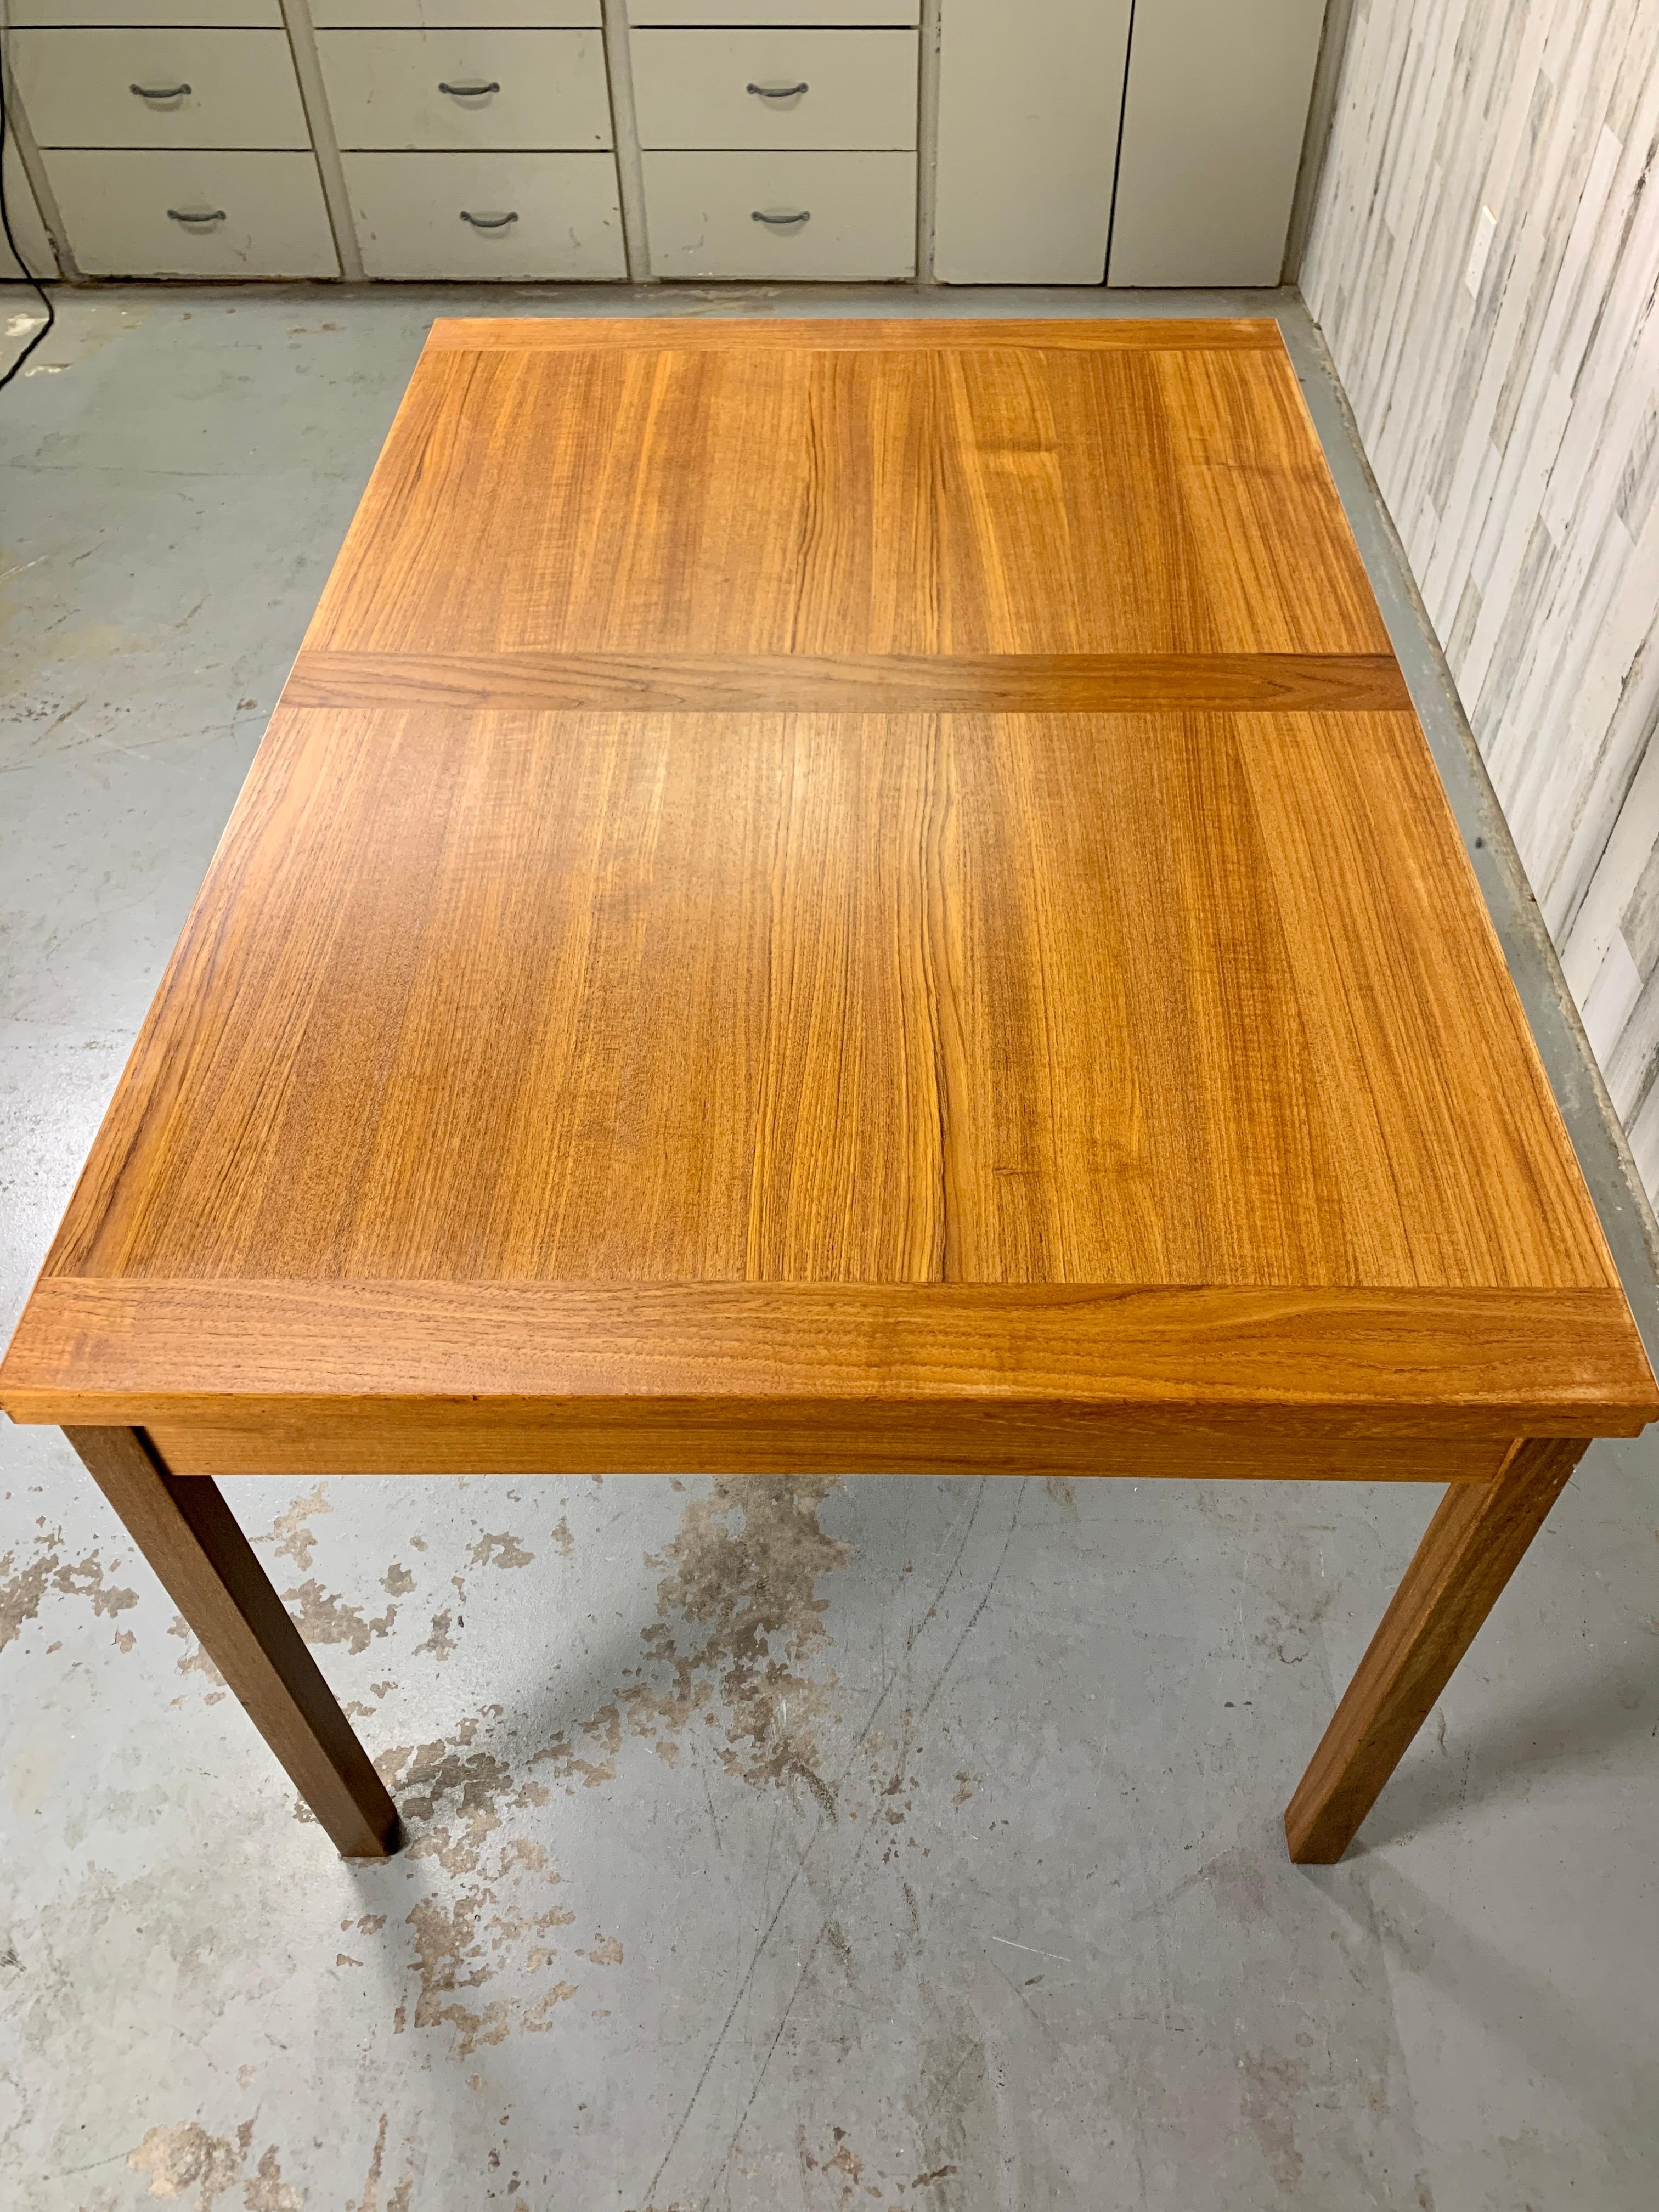 Danish Modern Teak Dining Table In Good Condition For Sale In Denton, TX